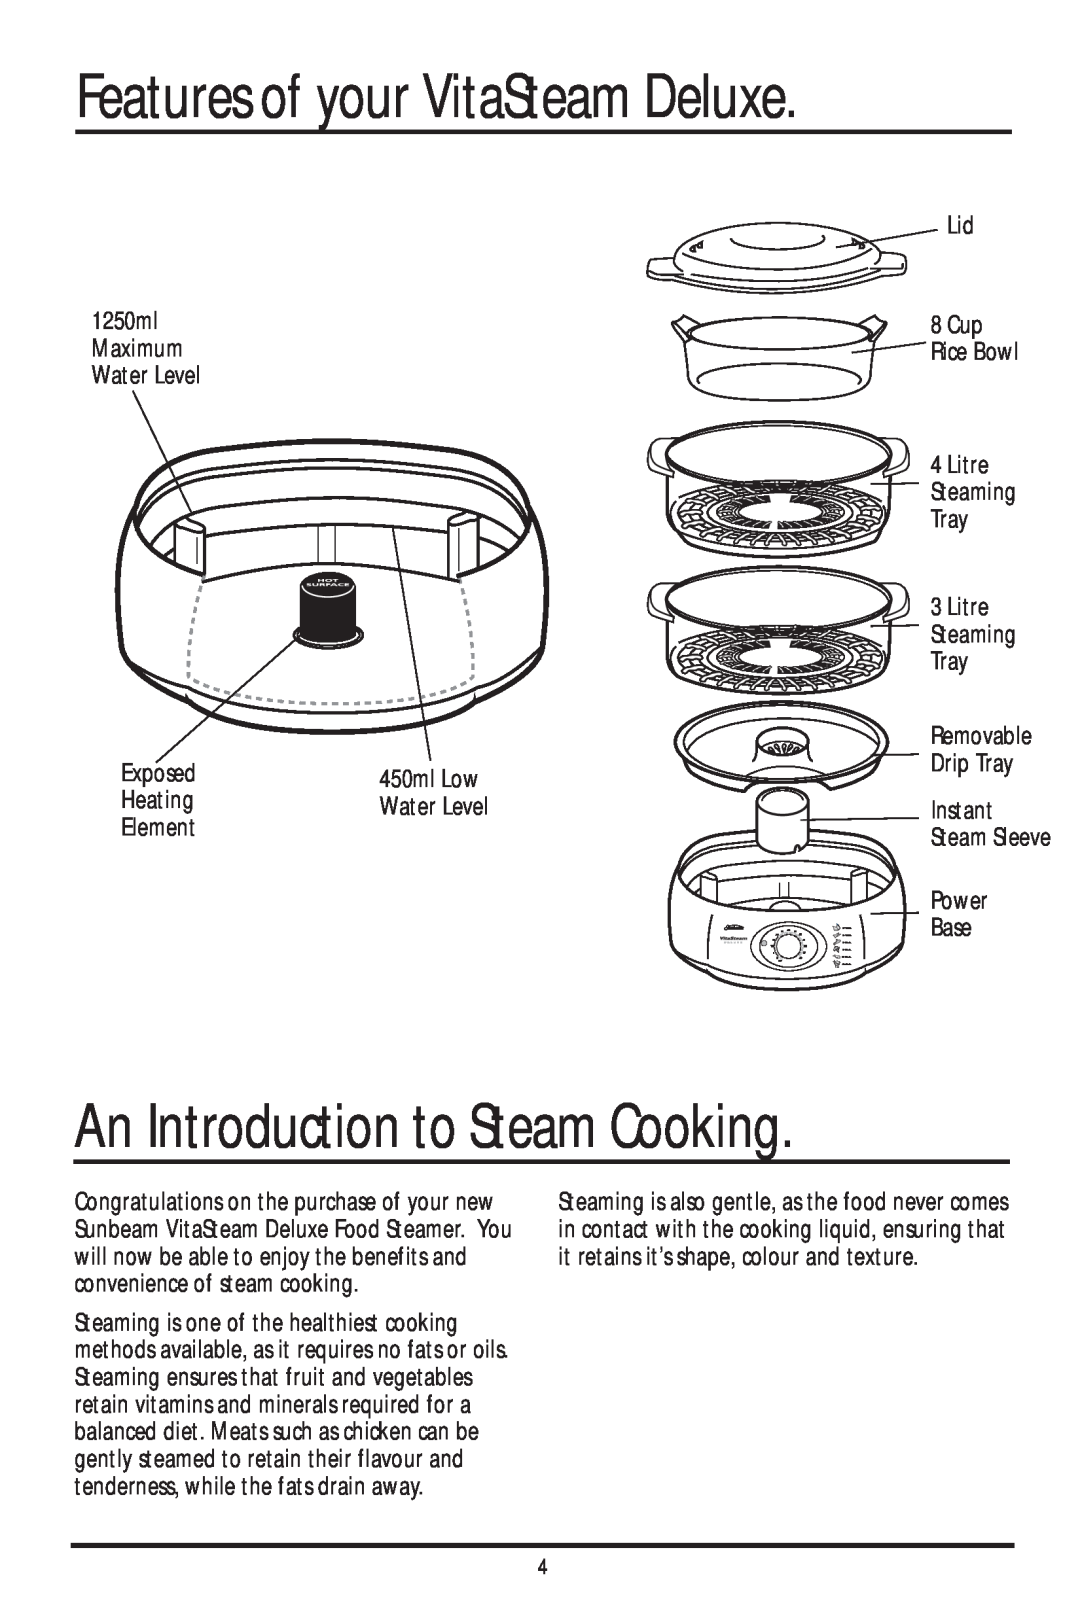 Sunbeam ST6600 manual An Introduction to Steam Cooking, Features of your VitaSteam Deluxe, Removable 